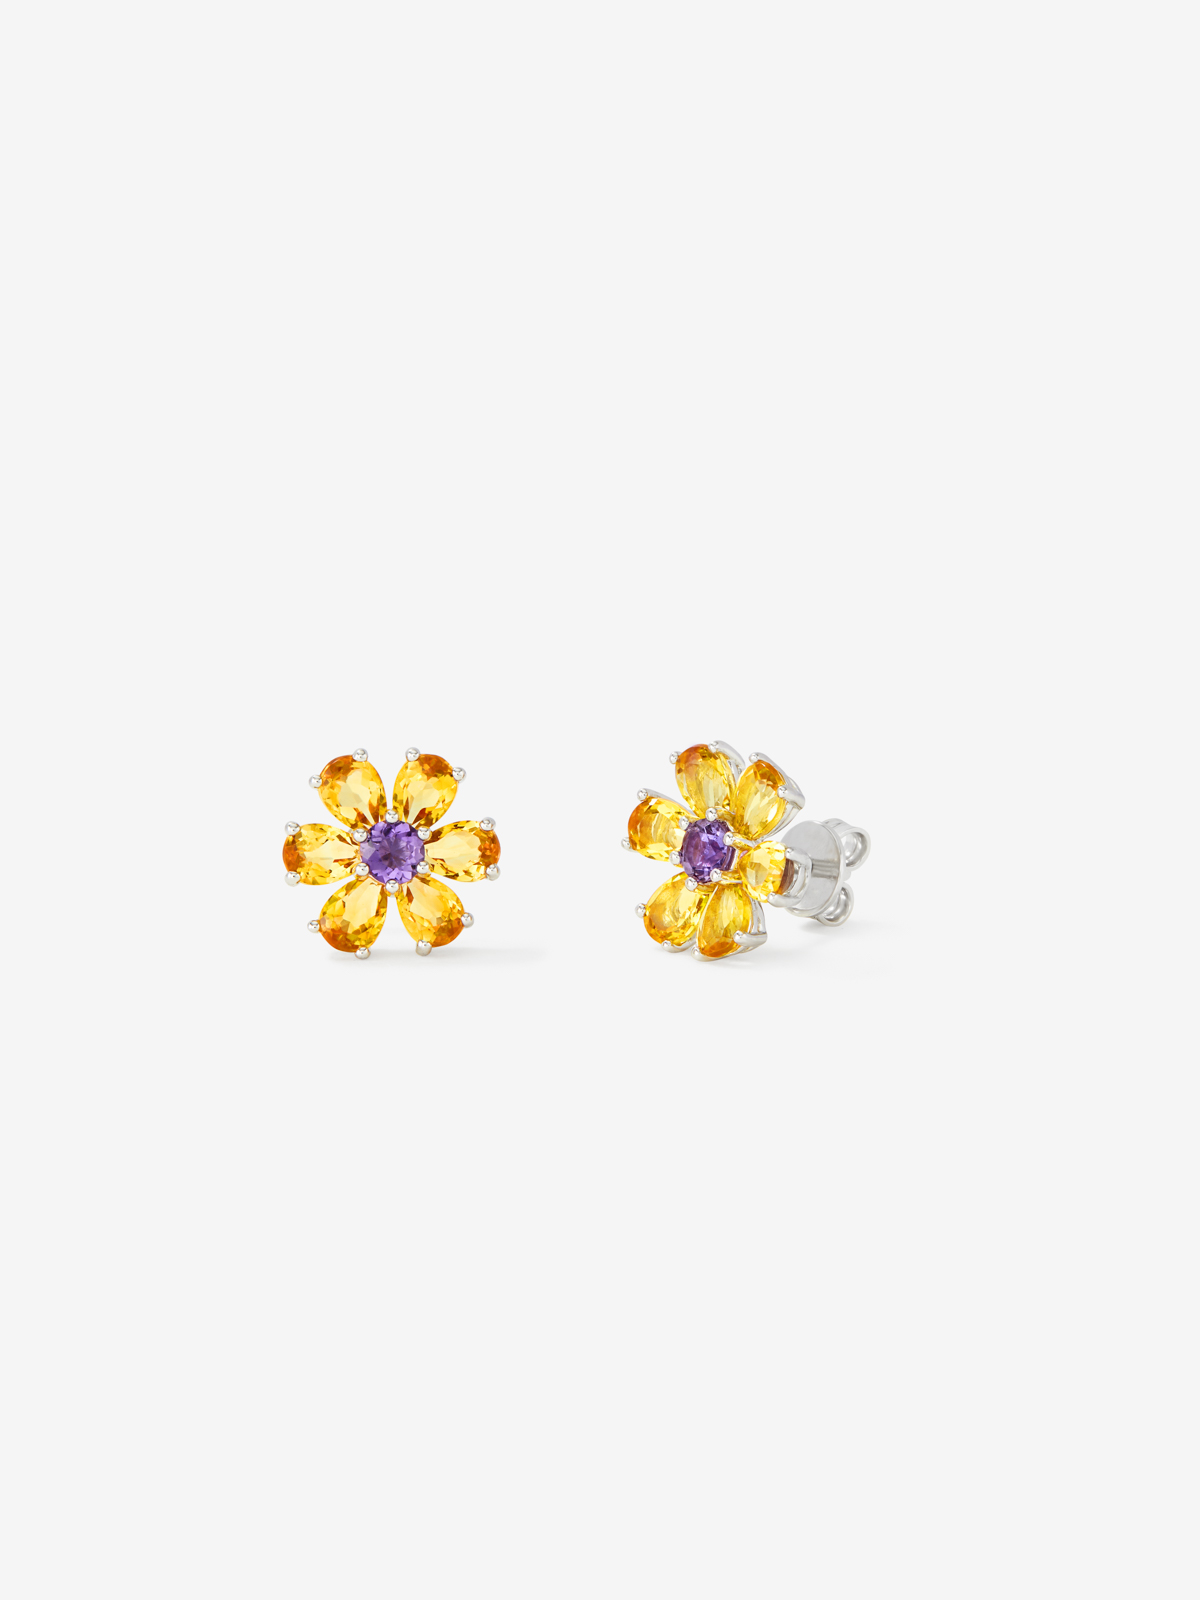 925 Silver Flower Earrings with Amethyst and Citrine